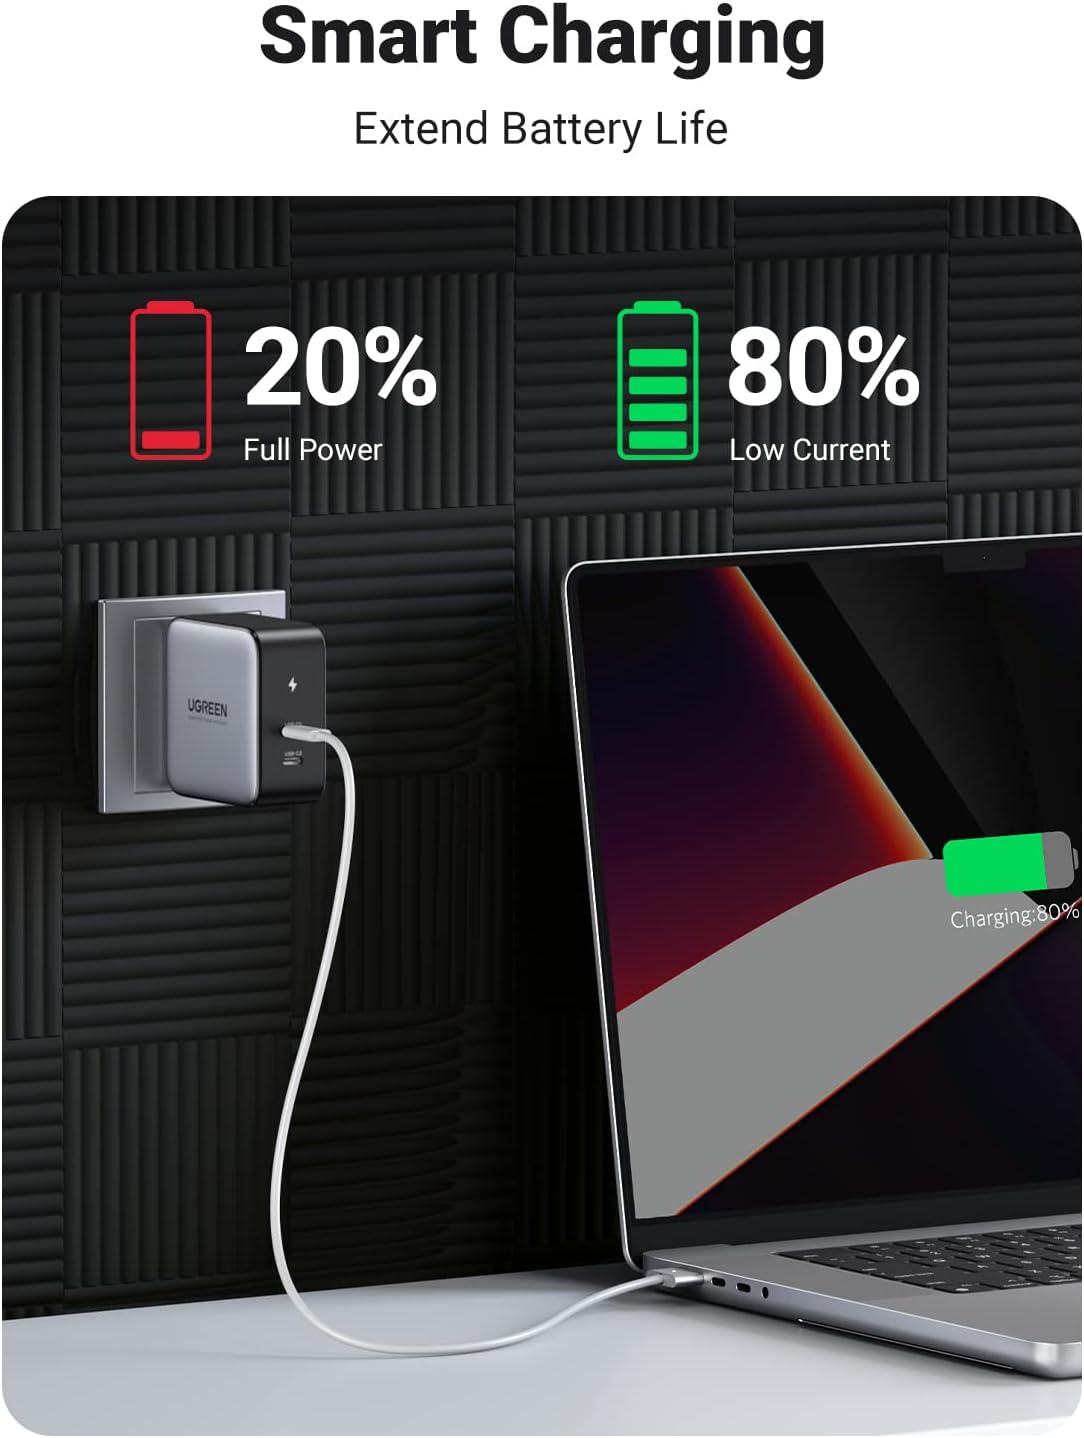 UGREEN 100W USB C Wall Charger, Nexode 2-Port GaN Foldable Fast Charger Block Compatible with MacBook Pro/Air, iPad Pro, iPhone 14 Pro, Dell XPS, Chromebook, Samsung Galaxy S23 Ultra, Pixel 7 Pro